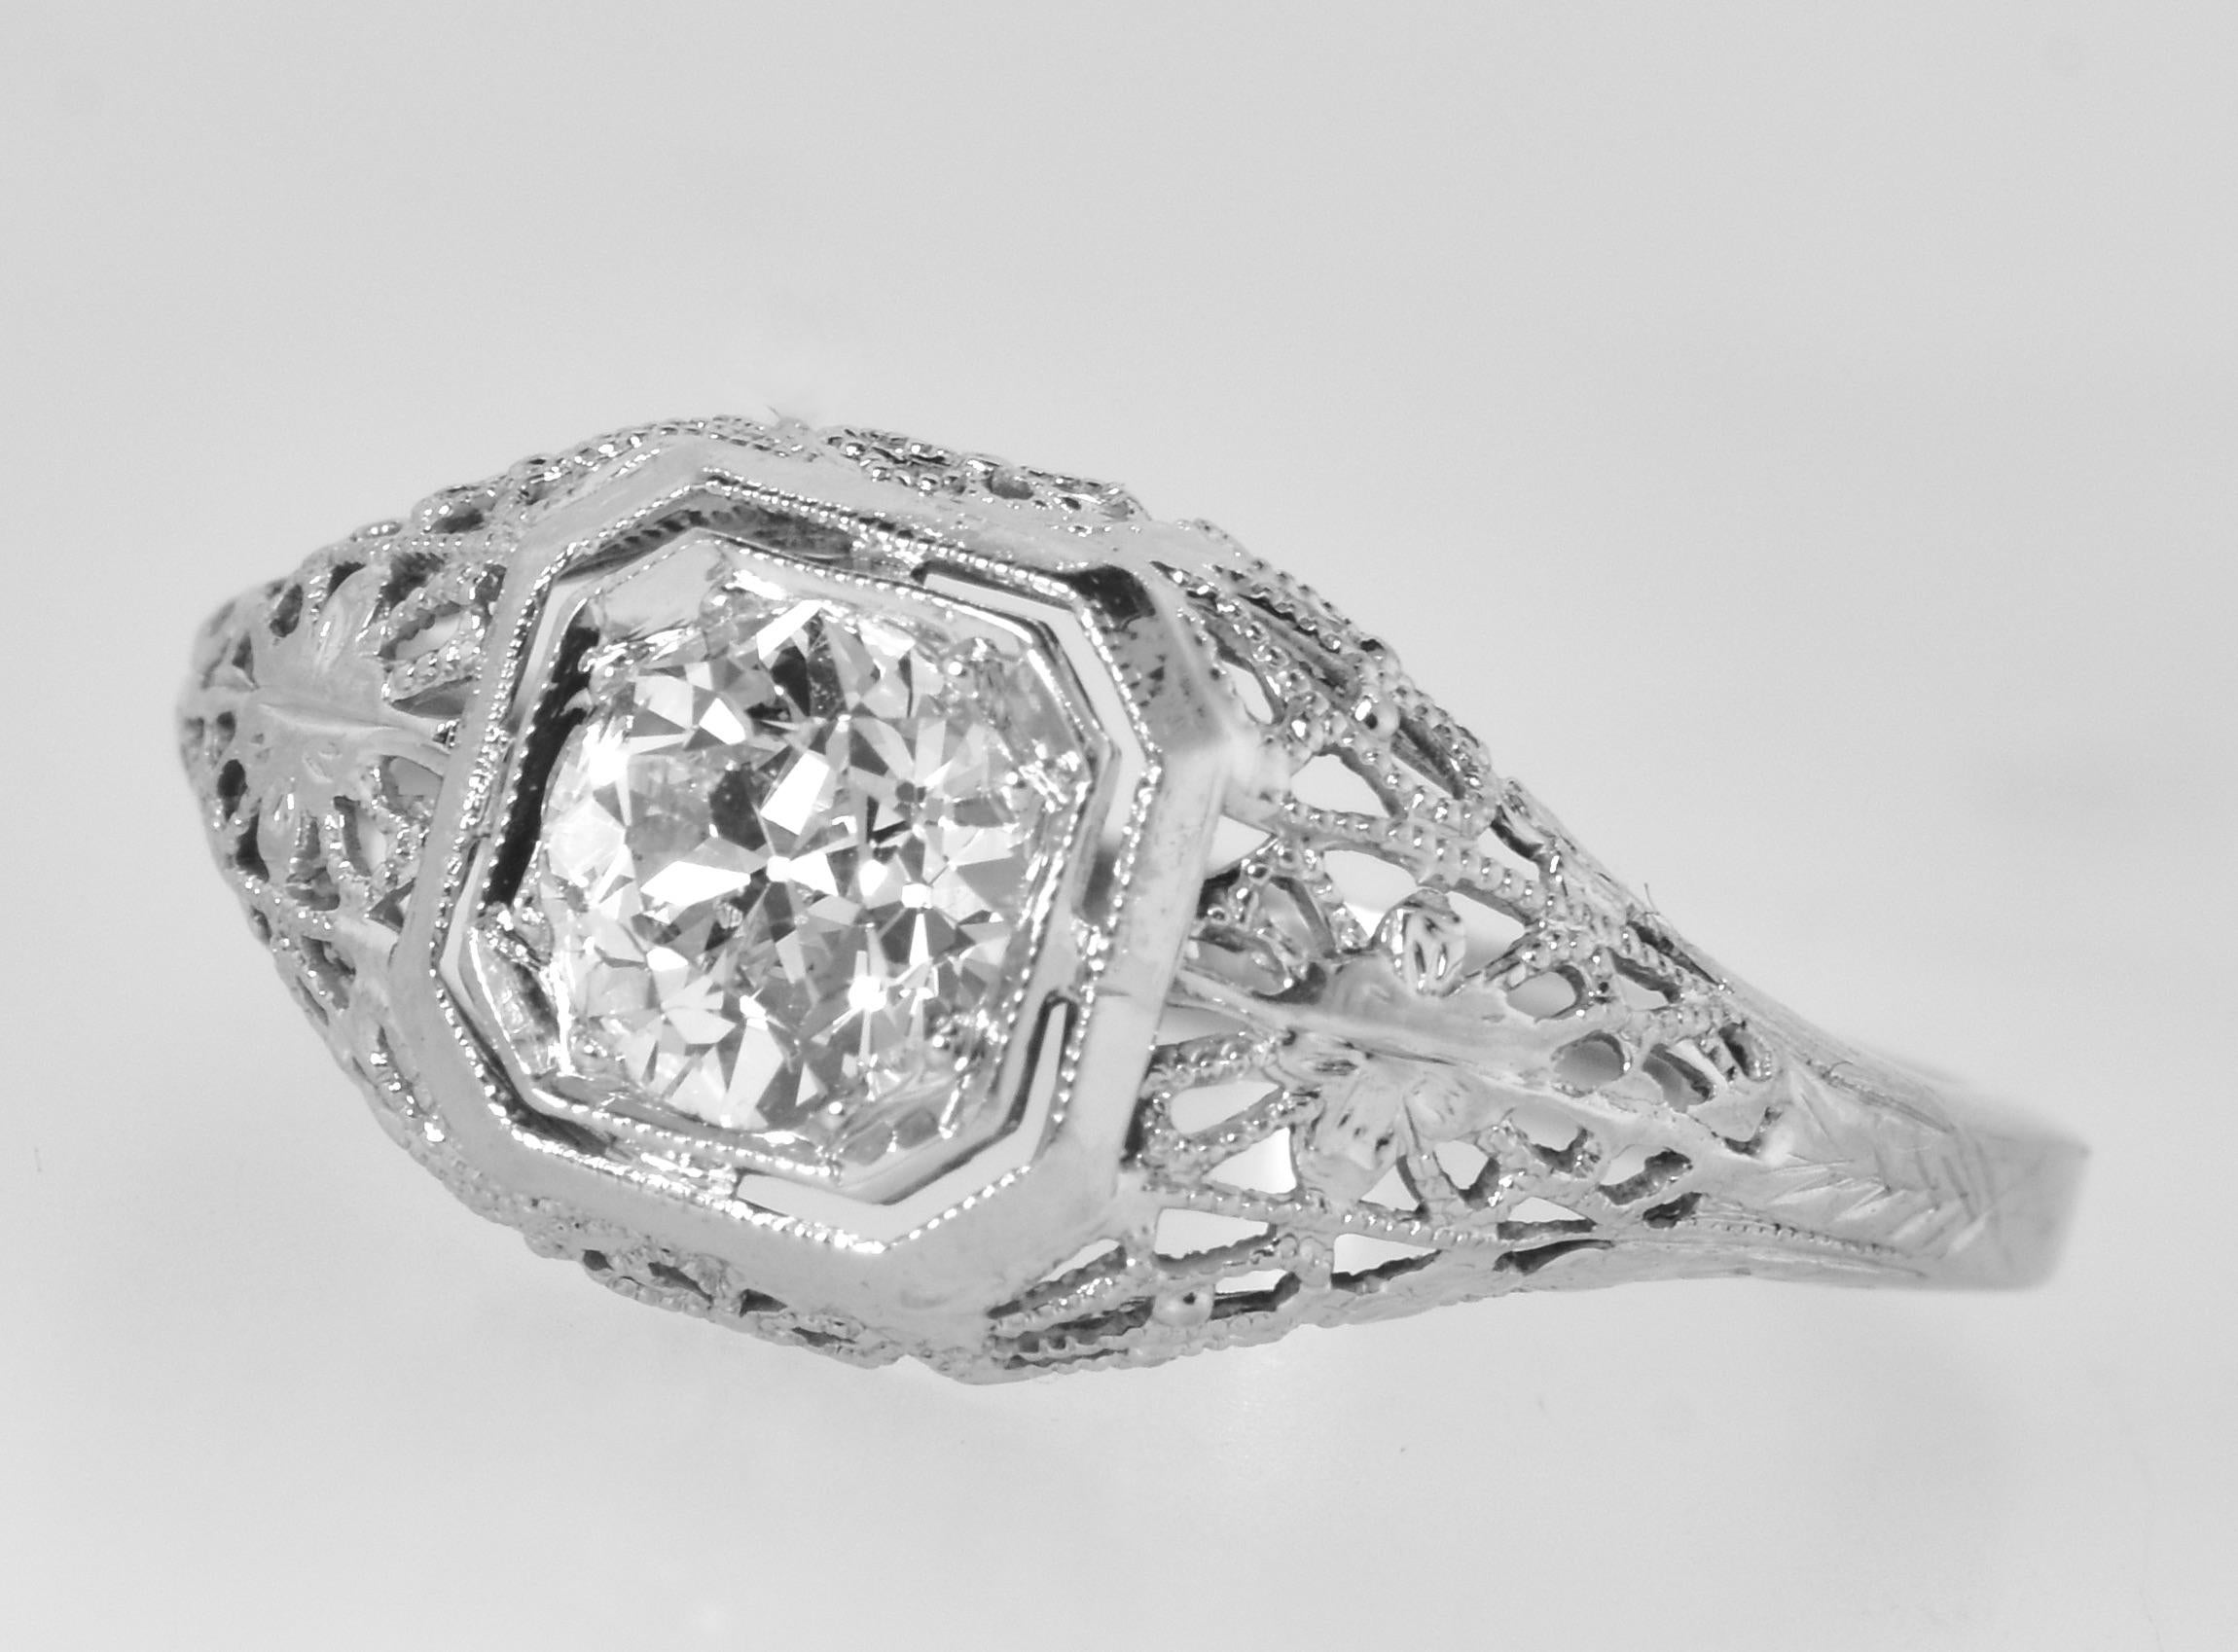 Antique Filigree Ring Fine .65 Ct. Diamond and 18K White Gold, American, c. 1920 For Sale 1